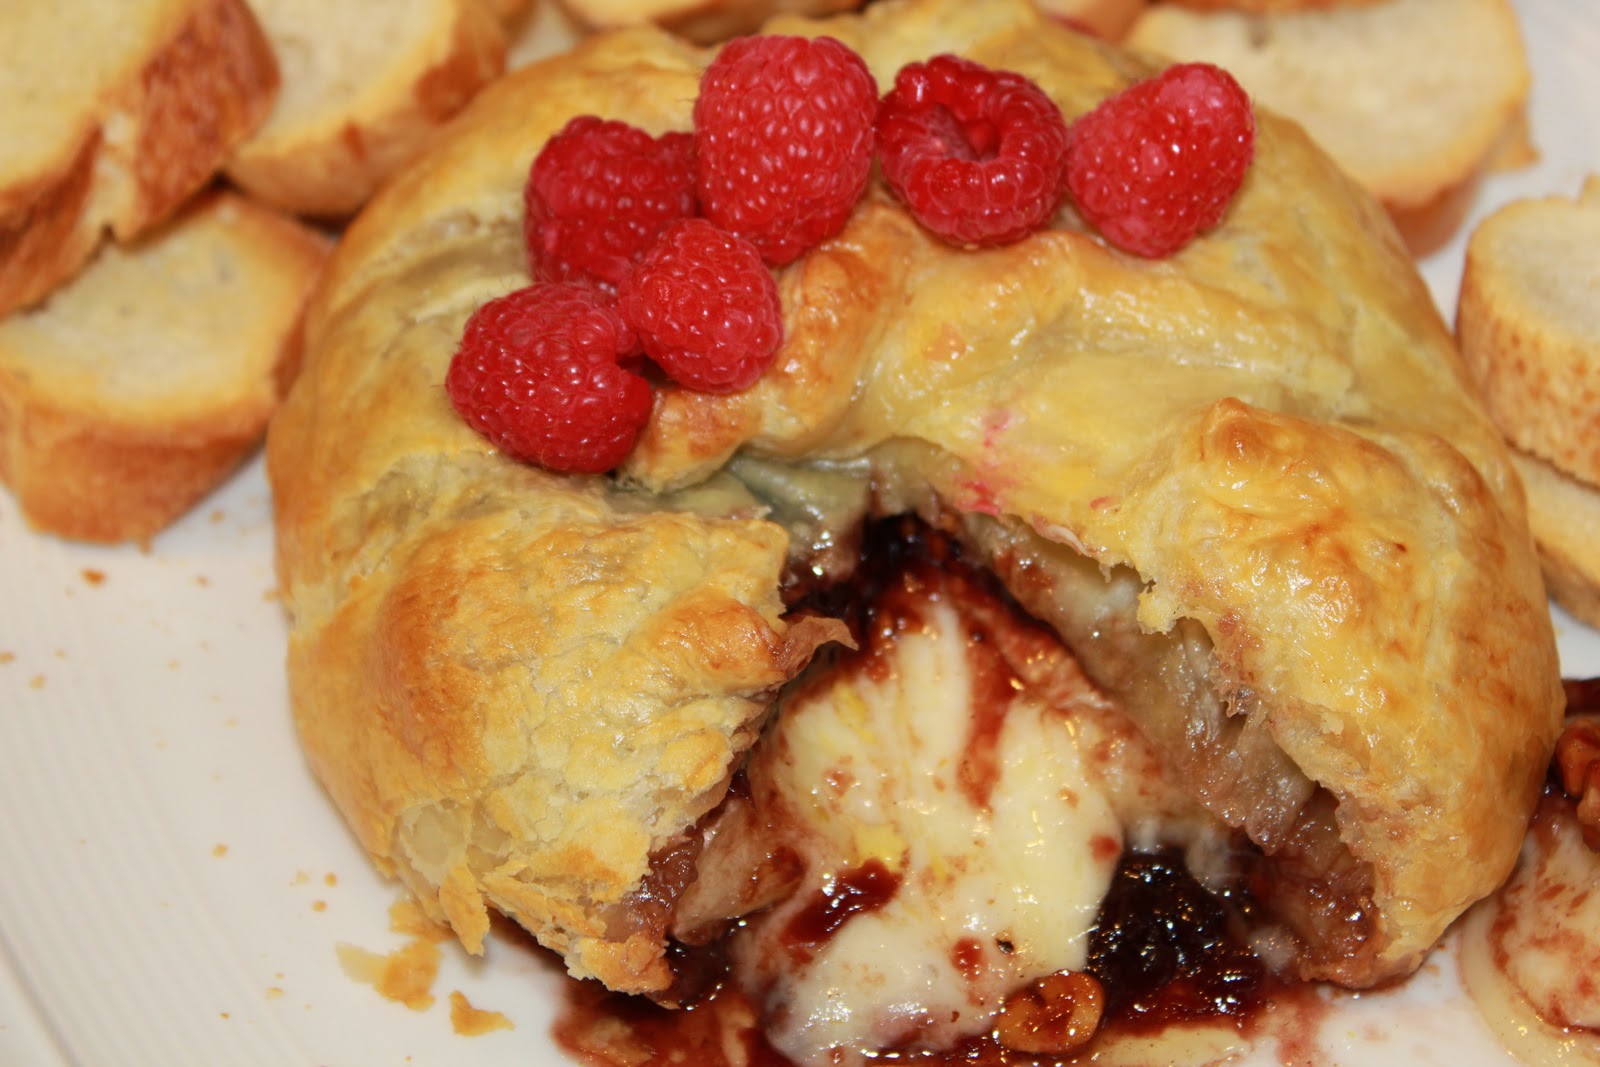 Forks & Amusement: Raspberry Baked Brie